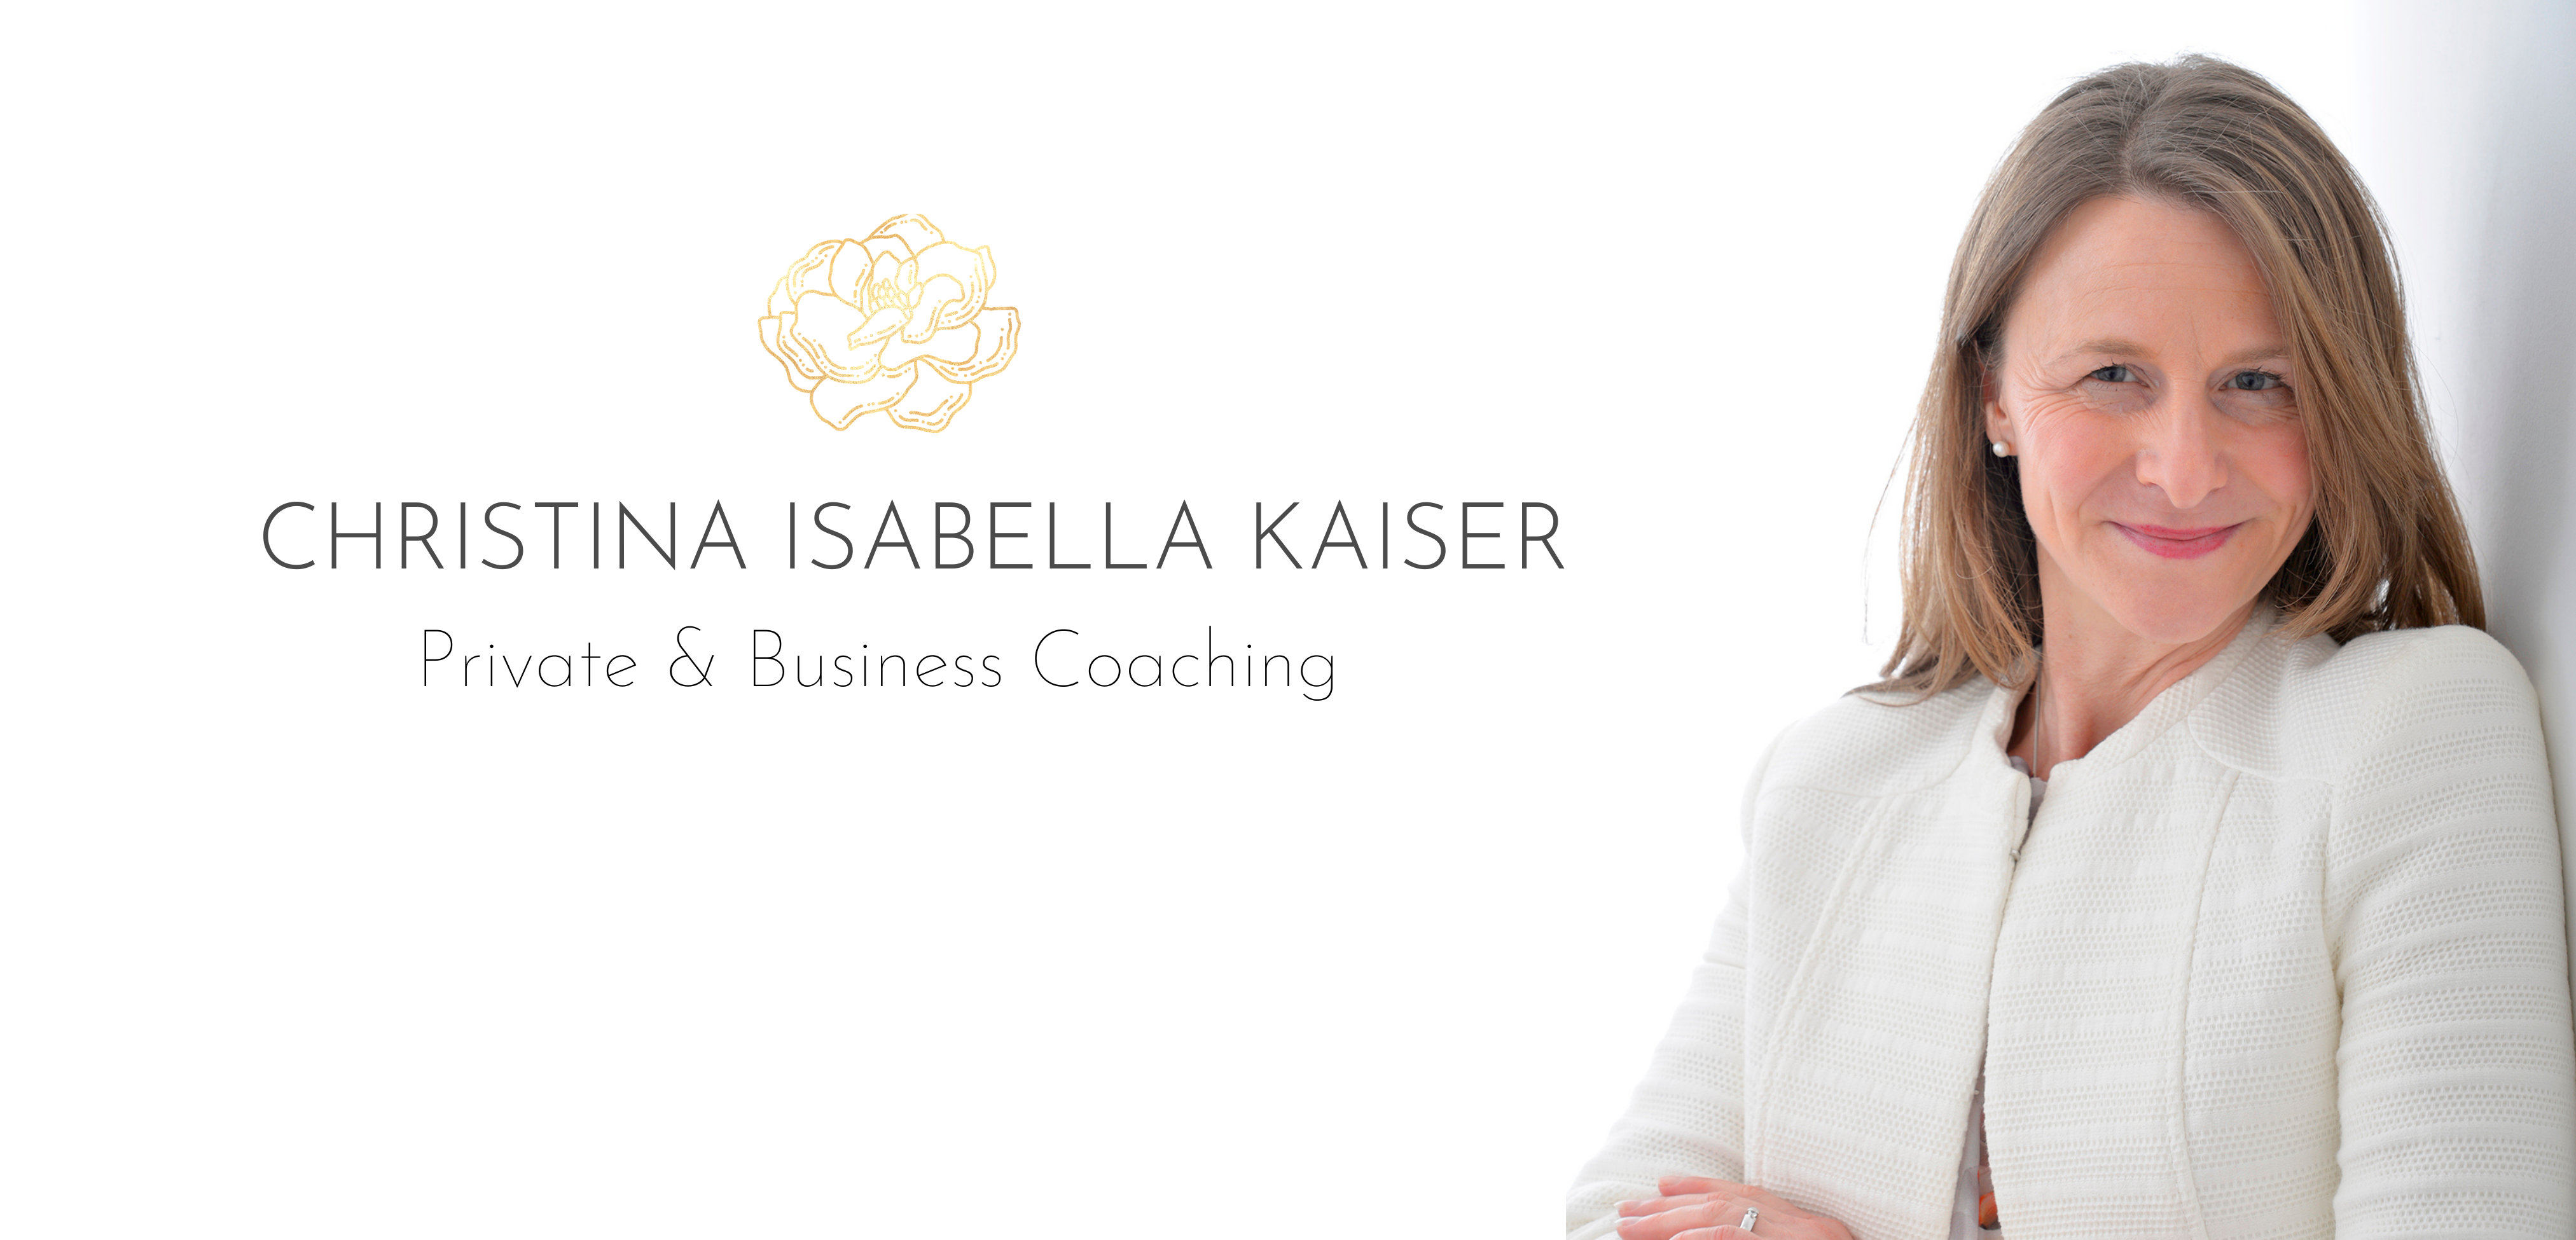 Christina Isabella Kaiser - Private & Business Coaching